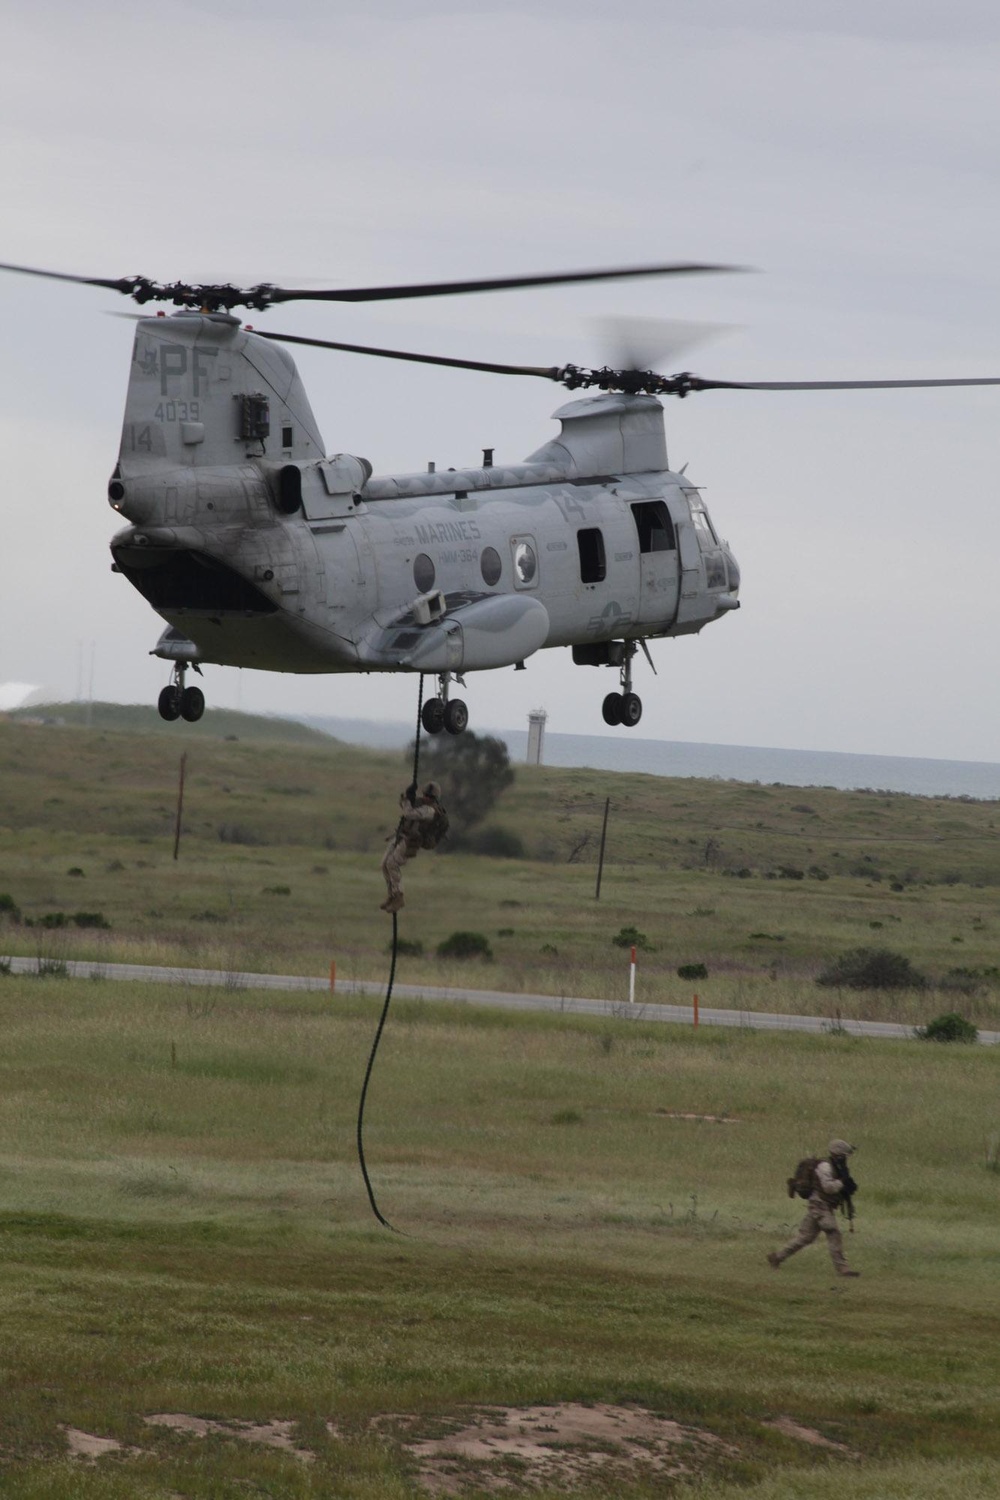 2/7, HMM-364 execute fast-rope training